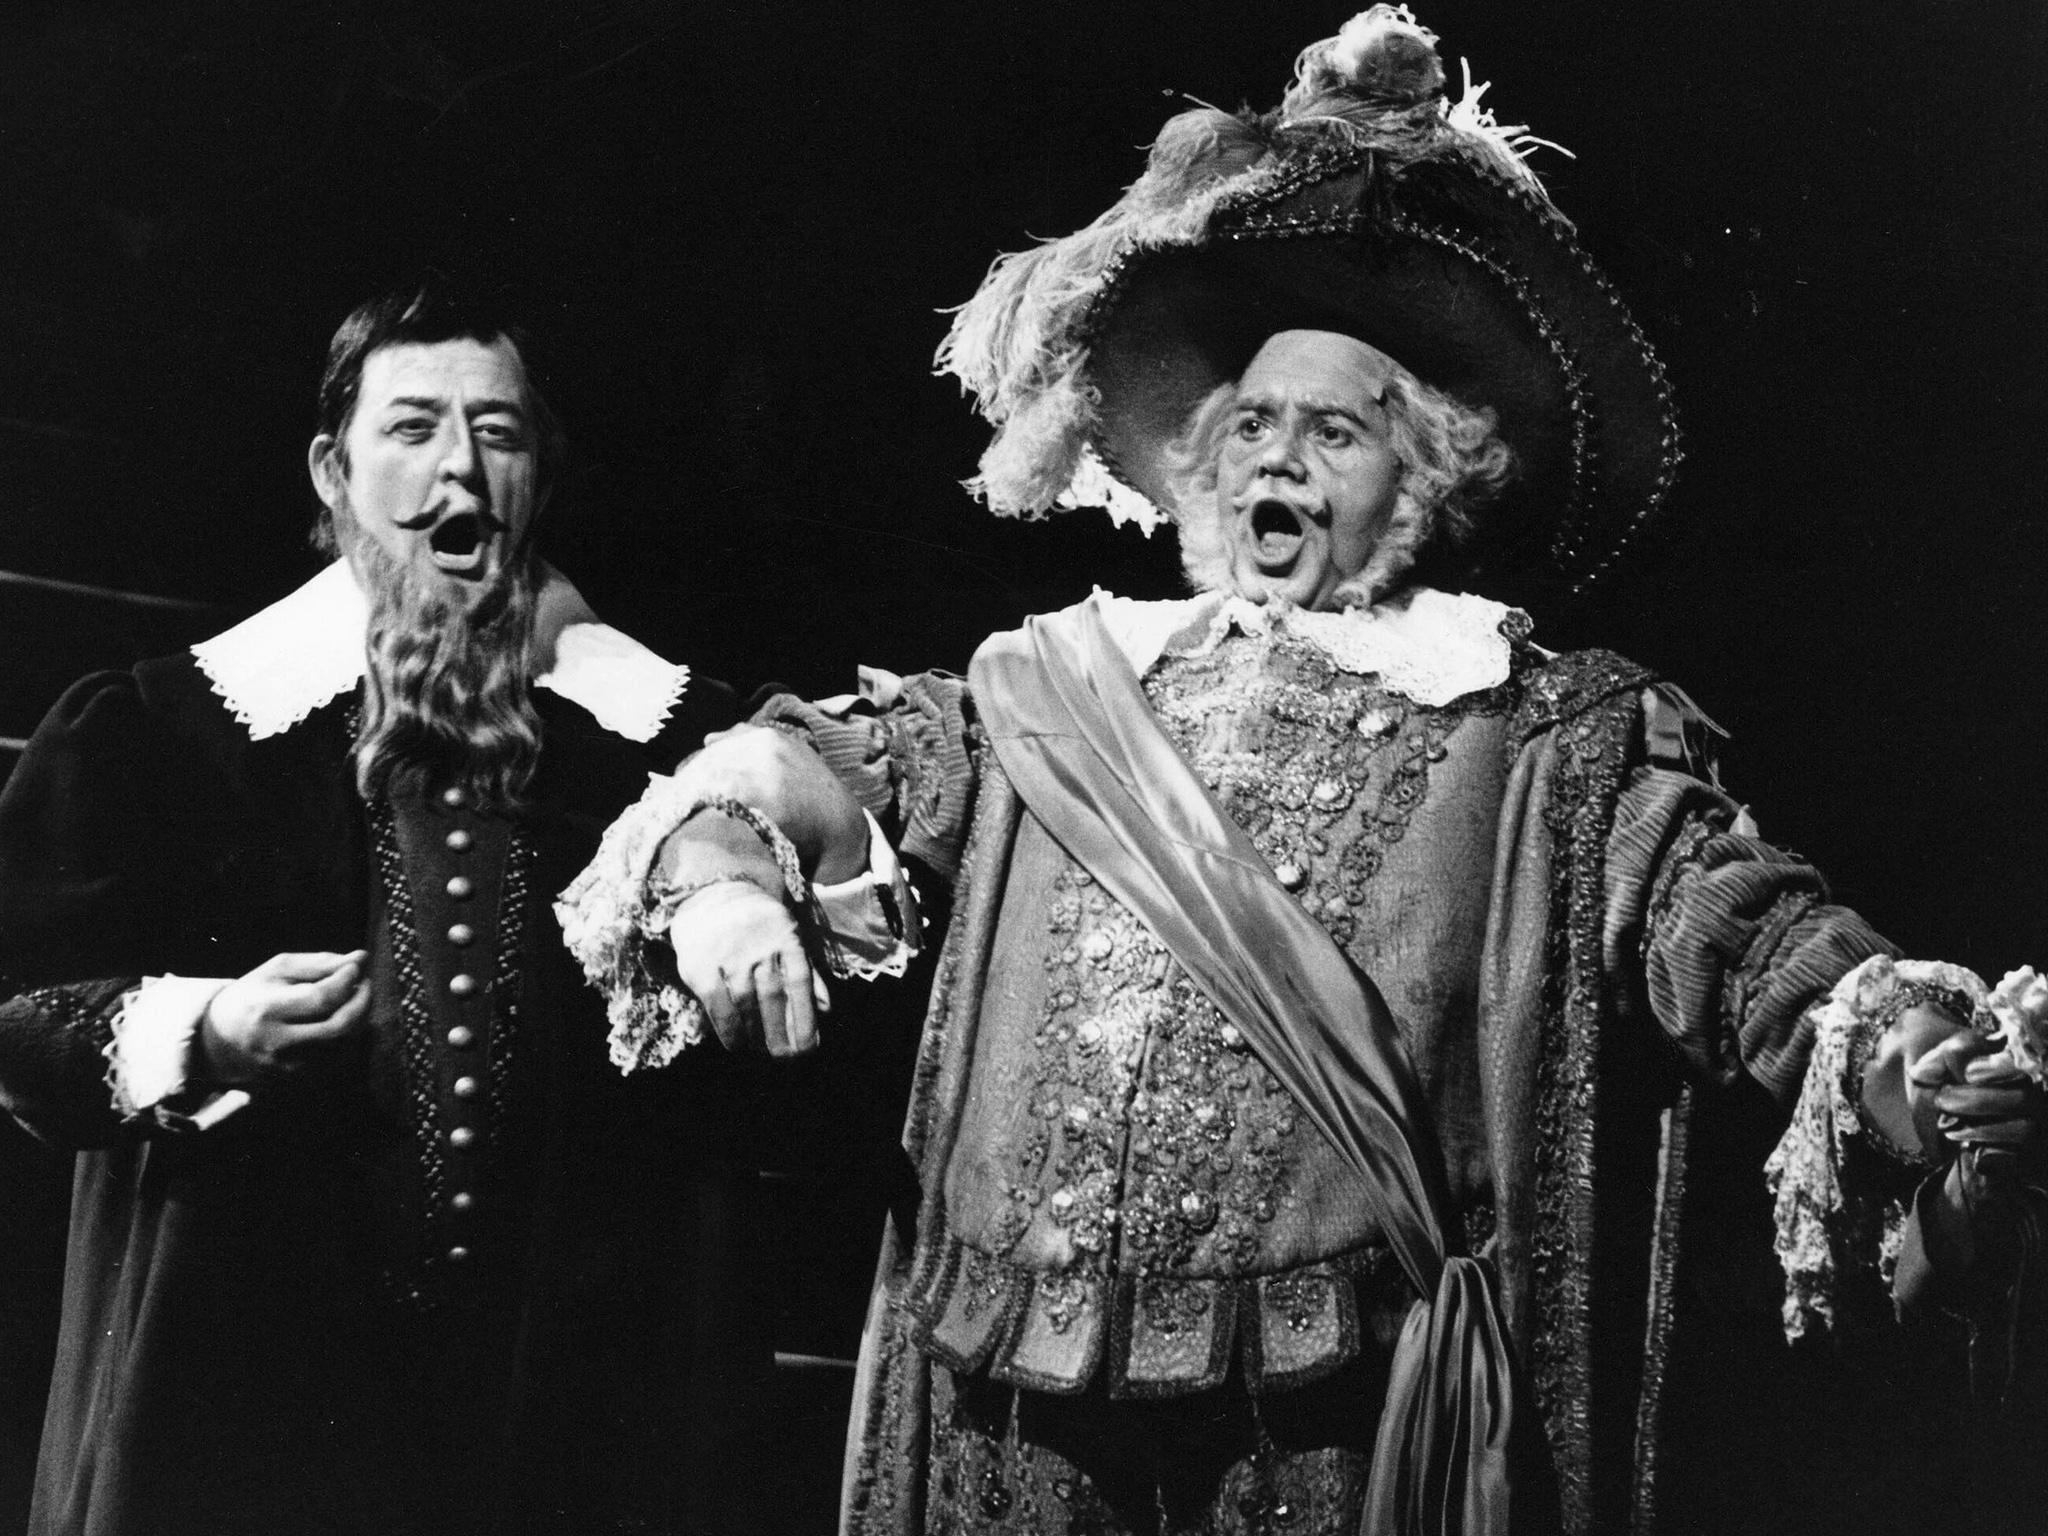 …or Falstaff, overflowing with vitality and perpetual laughter, for whom ‘the self is everything’ (Rex)